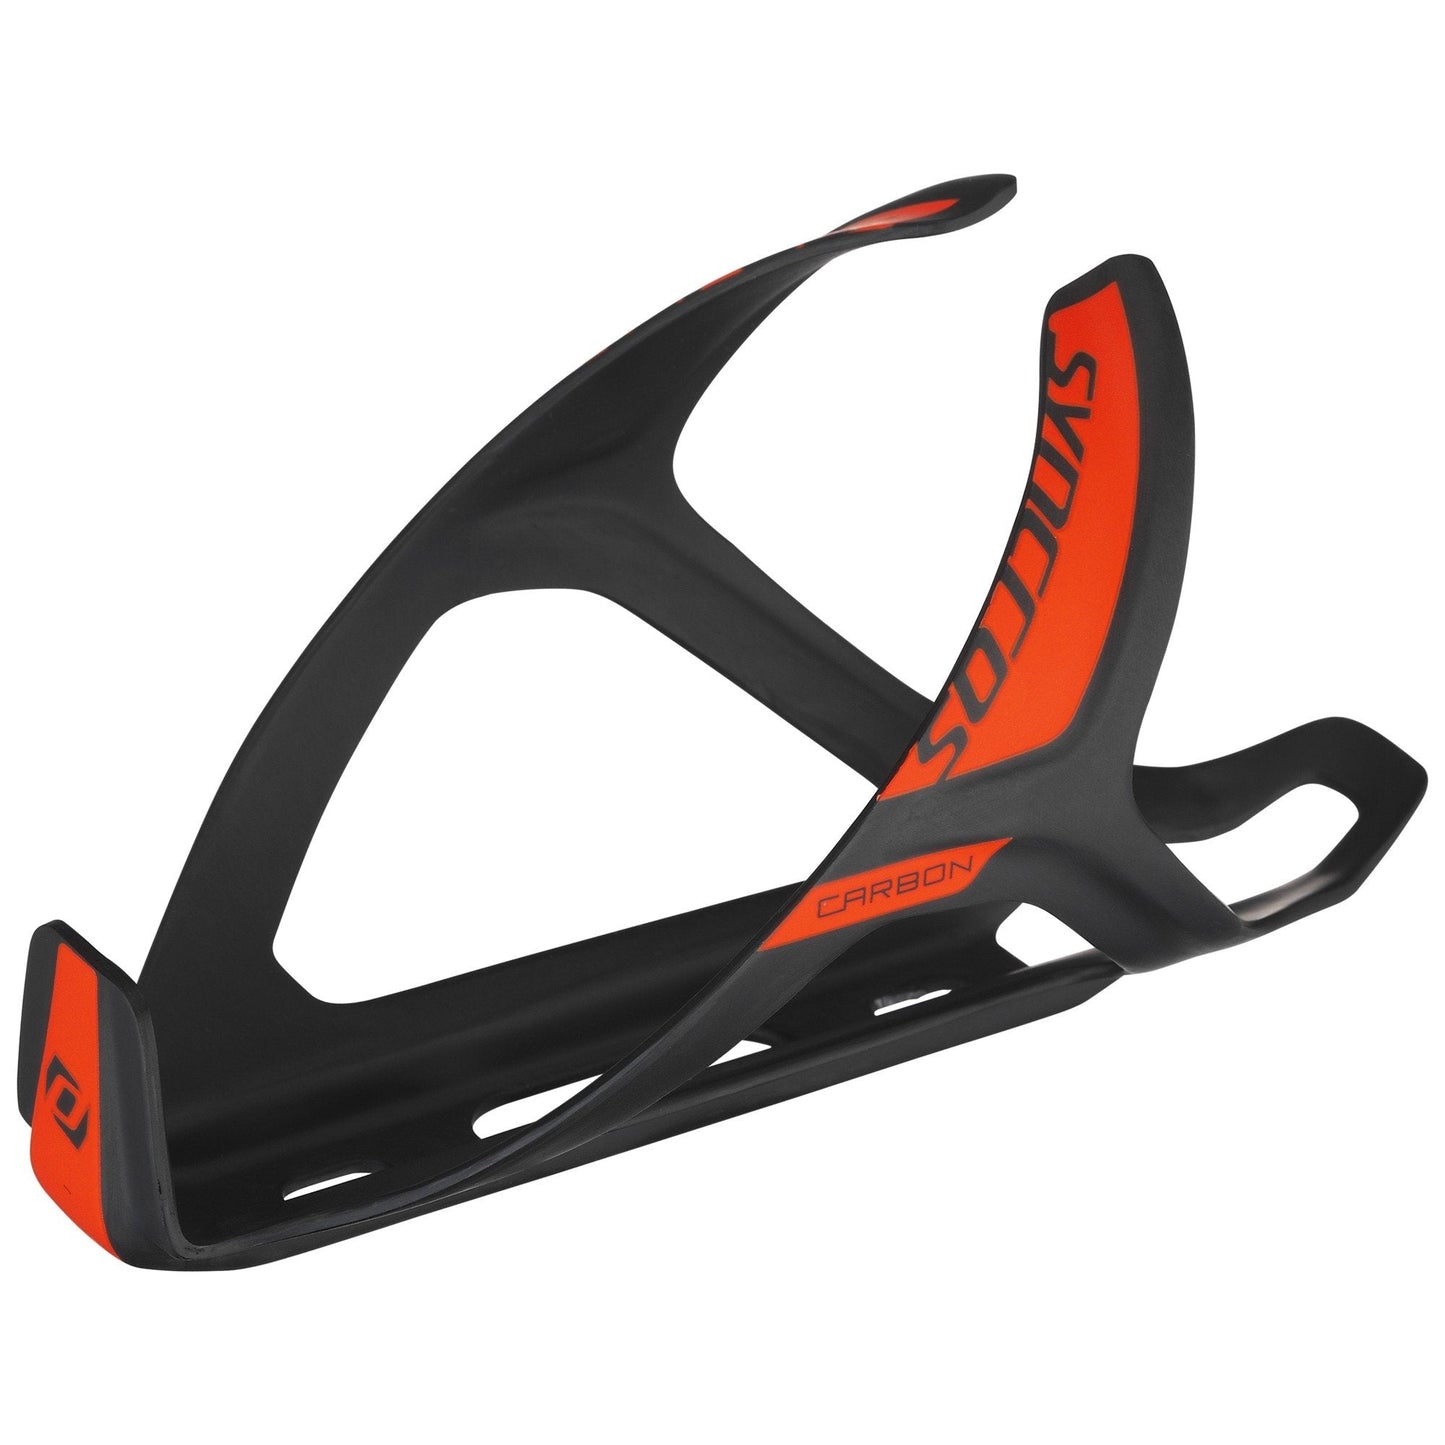 Syncros Carbon 1.0 bottle cage